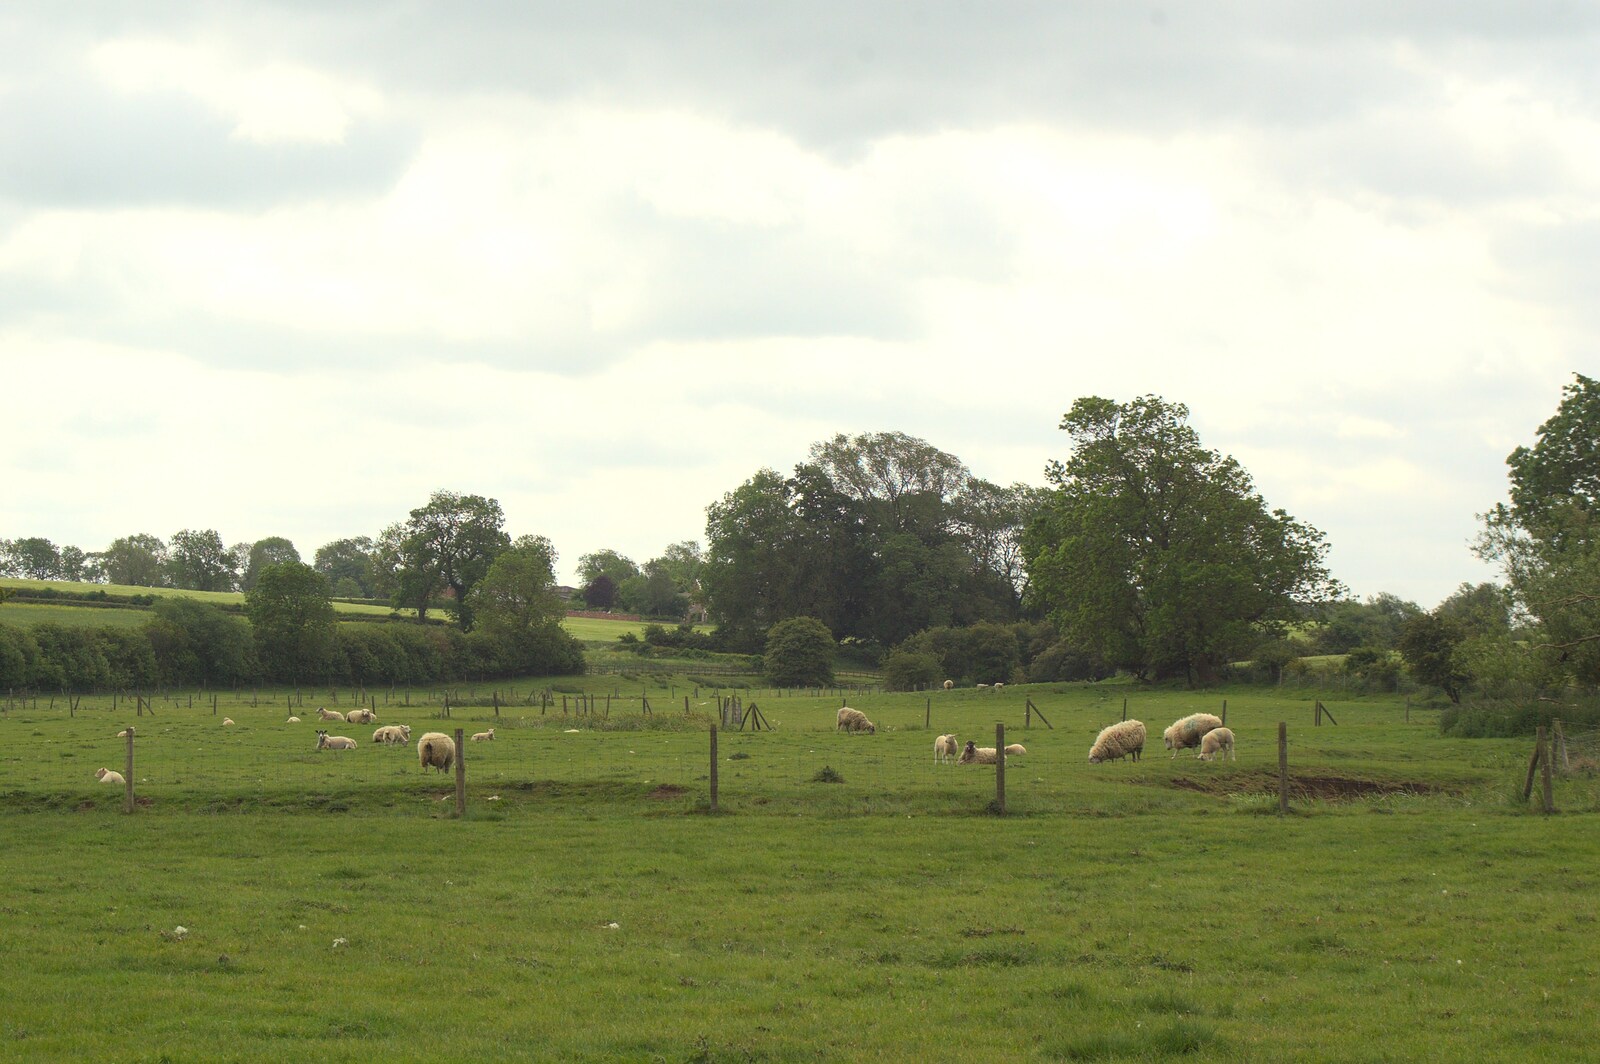 A field of sheep from A Christening, Wilford, Northamptonshire - 22nd May 2011